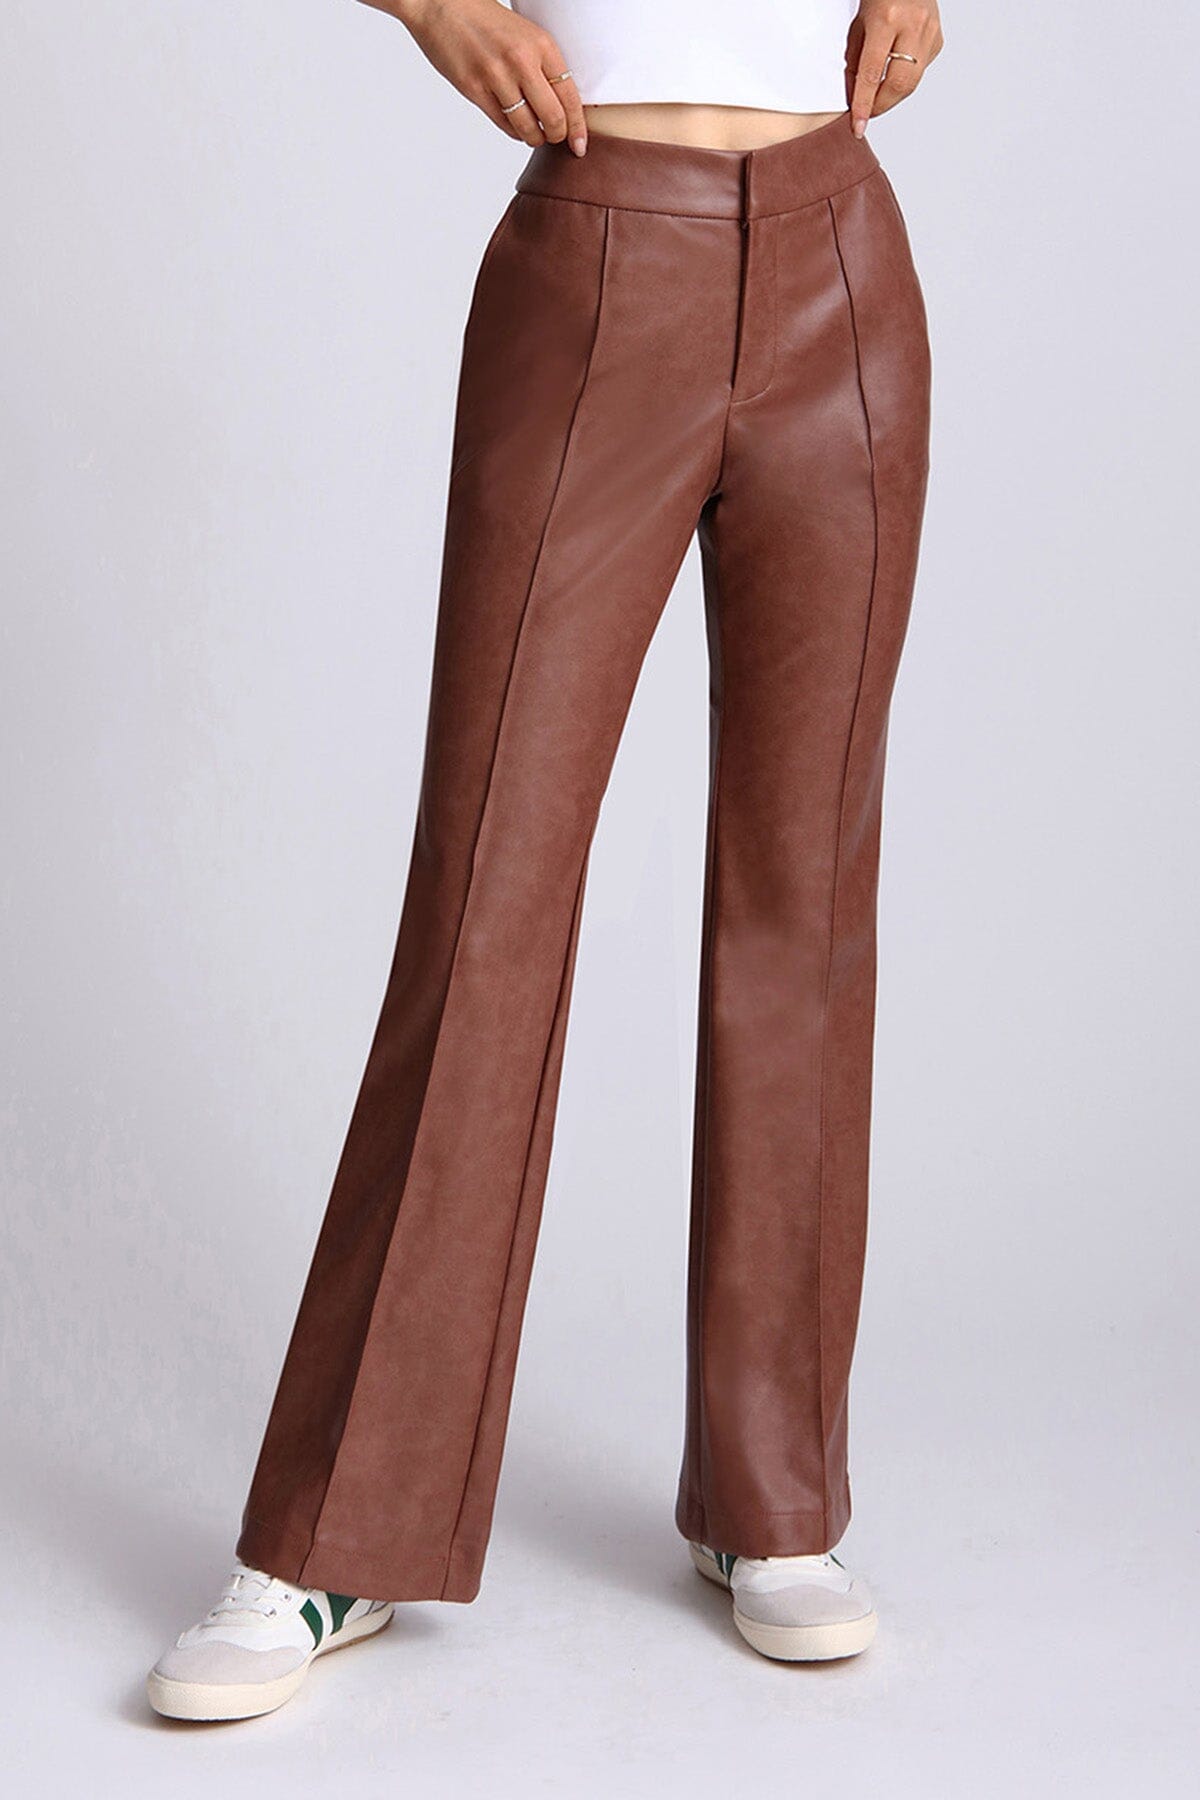 Brown faux leather high waisted flare leg trouser pants by Avec Les Filles - women's figure flattering fall fashion trends